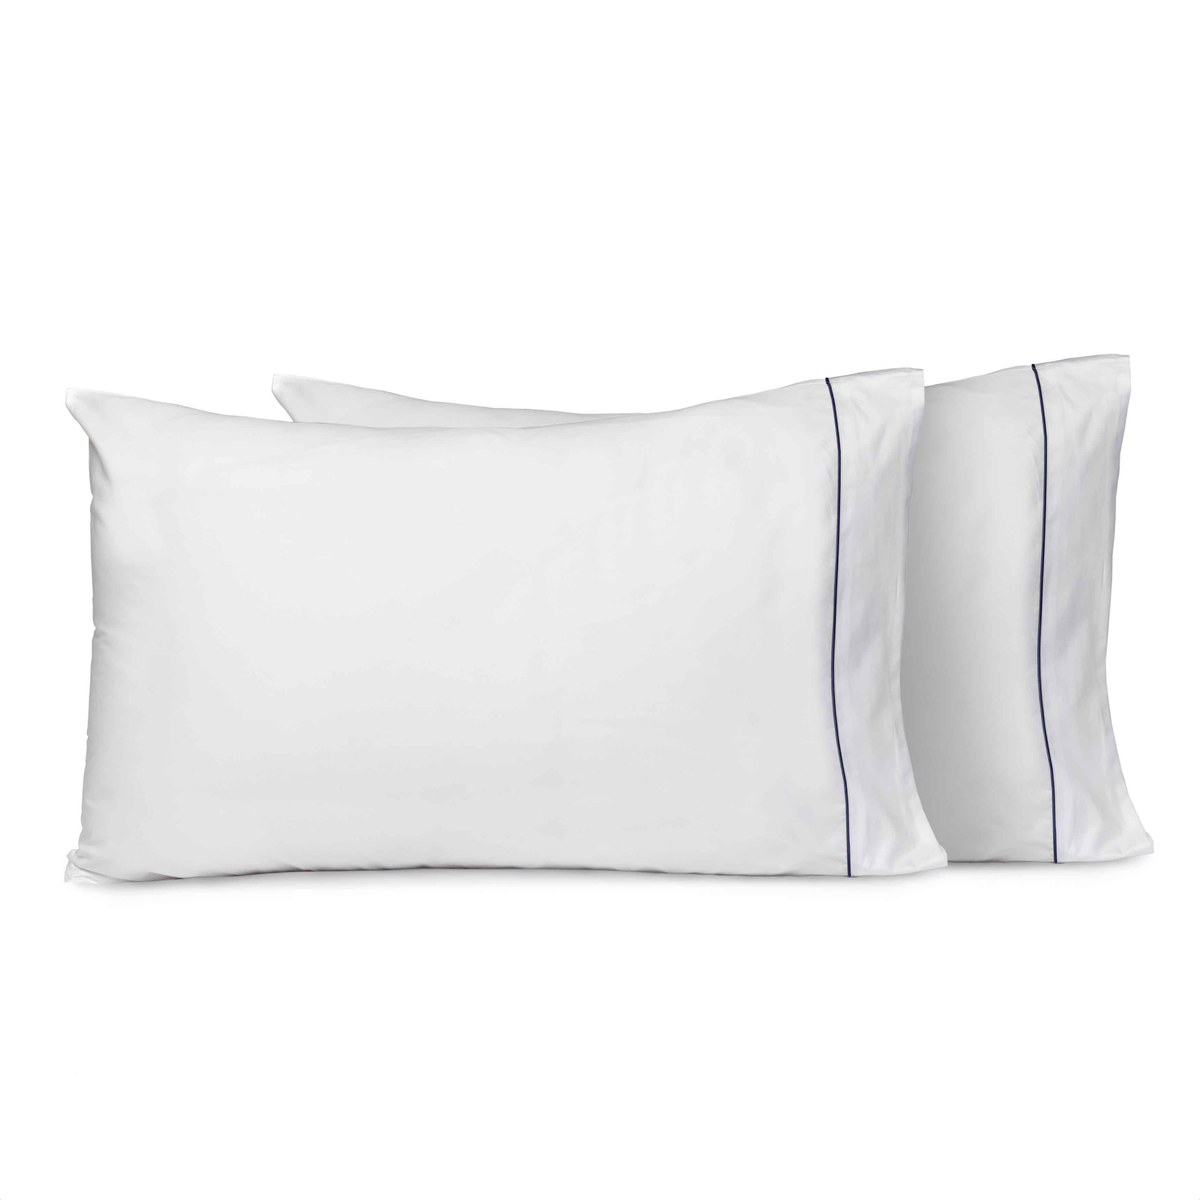 Pair of Pillowcases of Signoria Luce Bedding in Midnight Blue Color